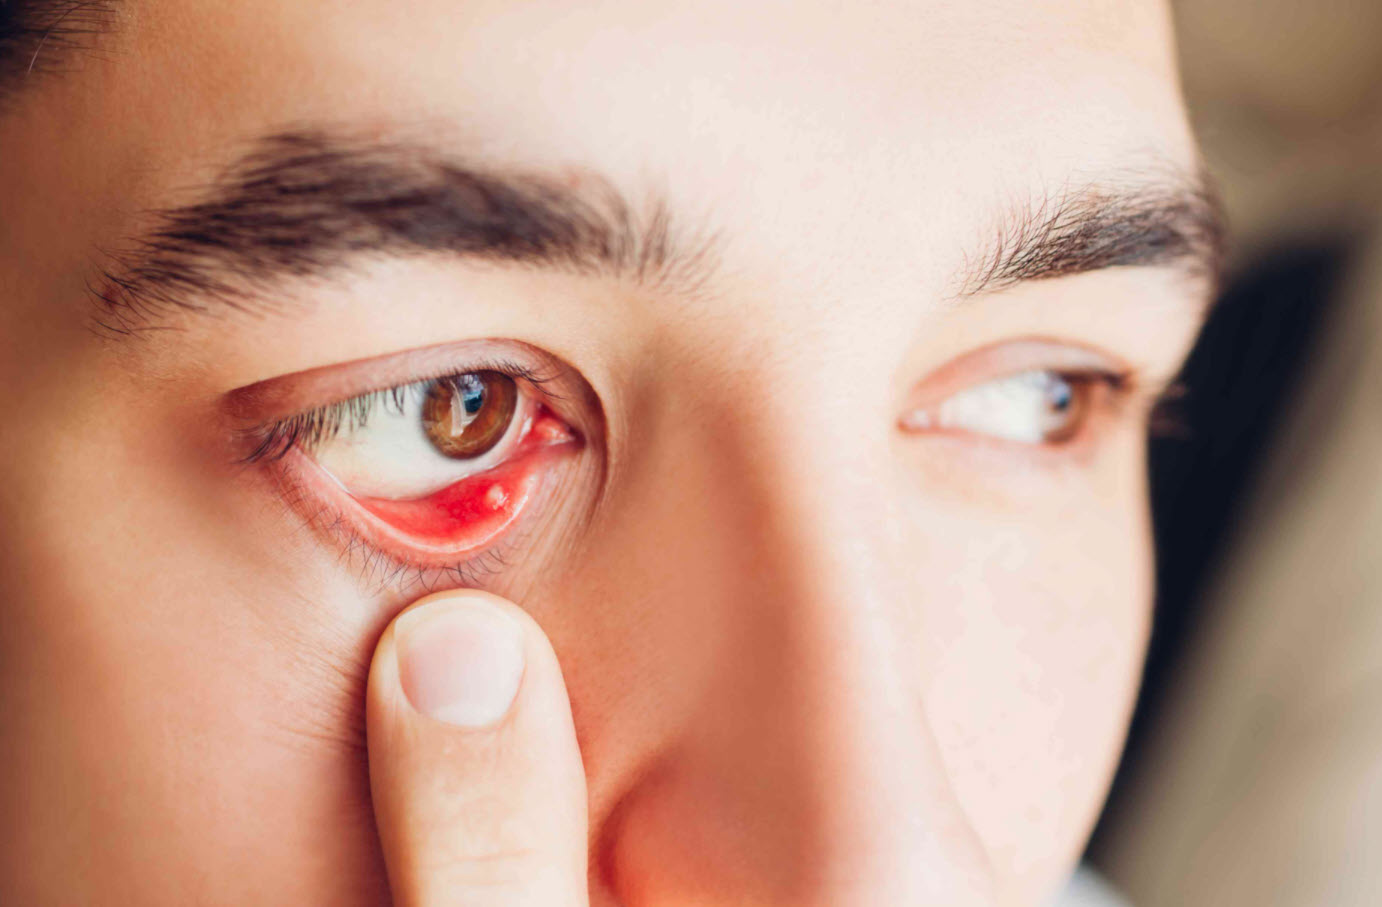 What causes a stye